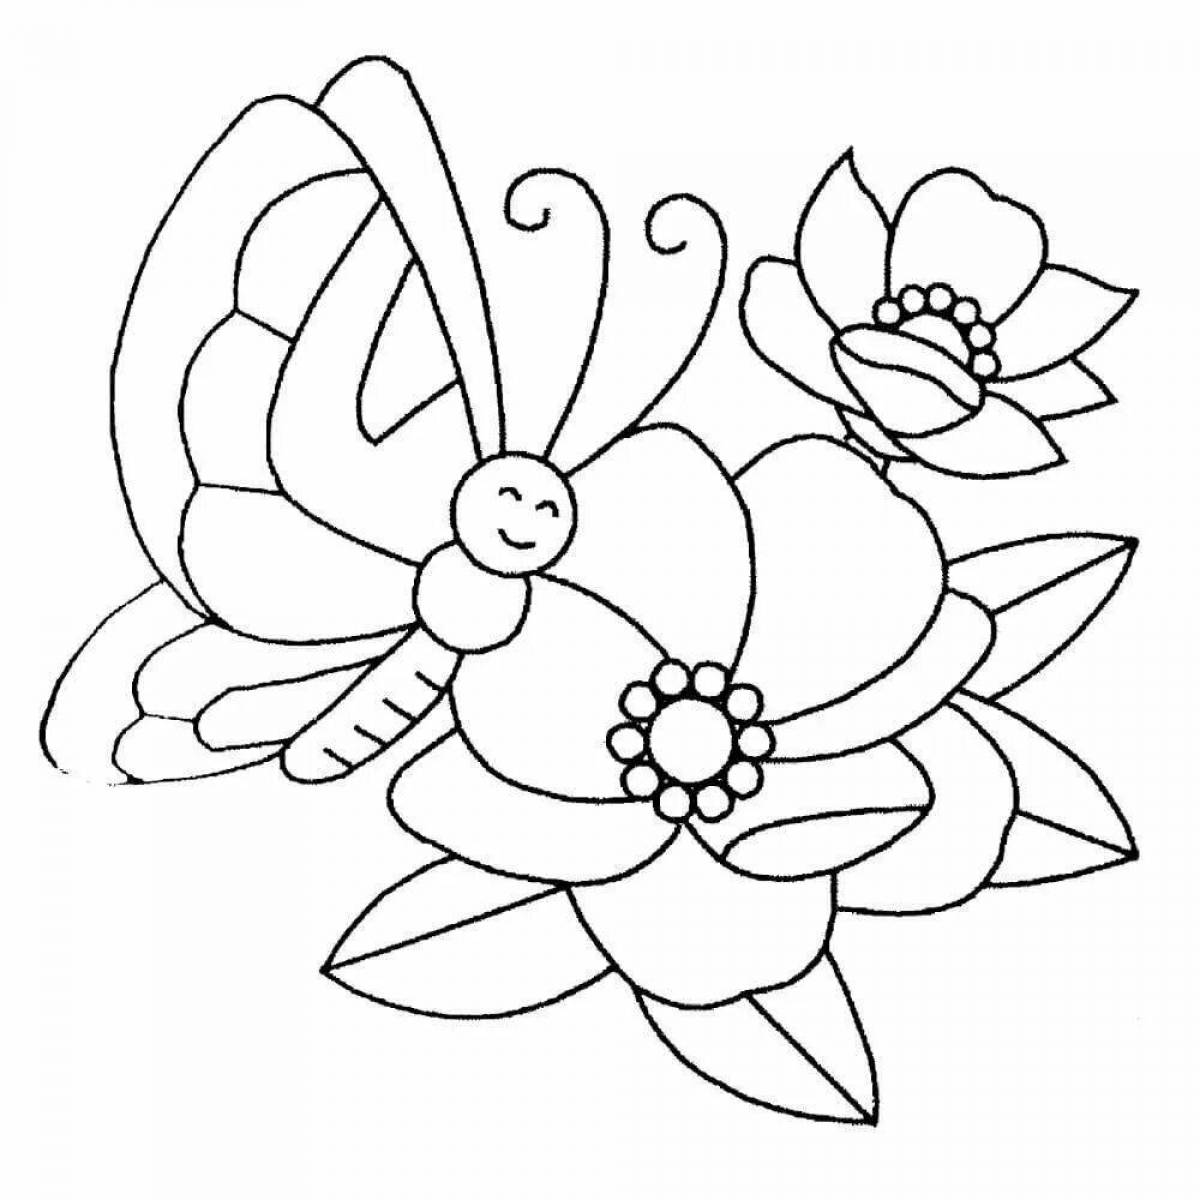 Peace coloring flower for children 5-6 years old